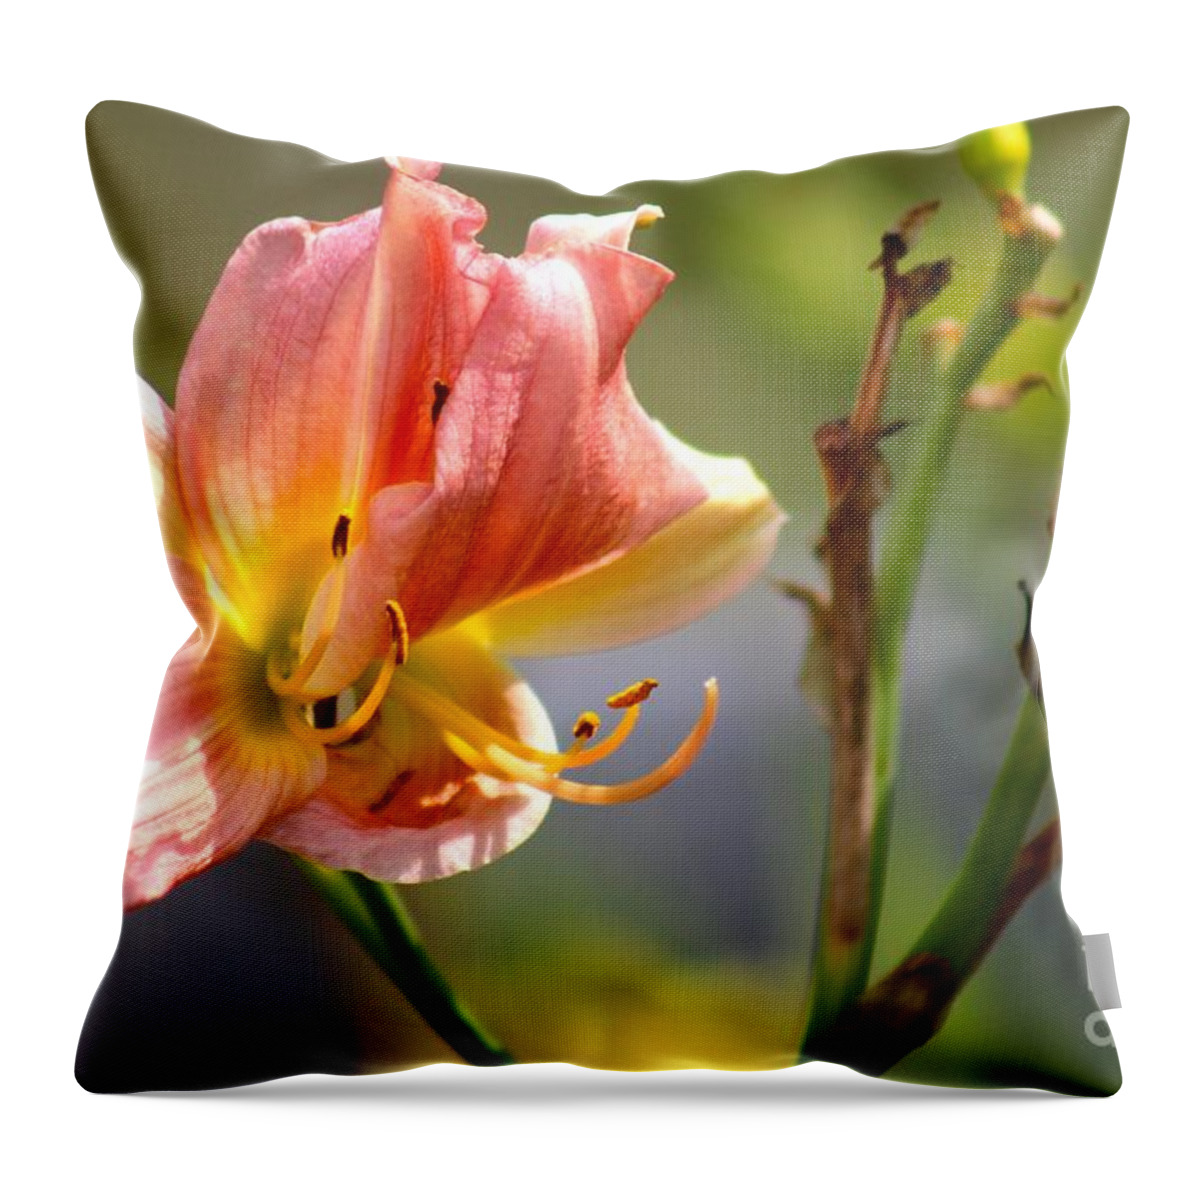 Pink Throw Pillow featuring the photograph Nature's Beauty 124 by Deena Withycombe